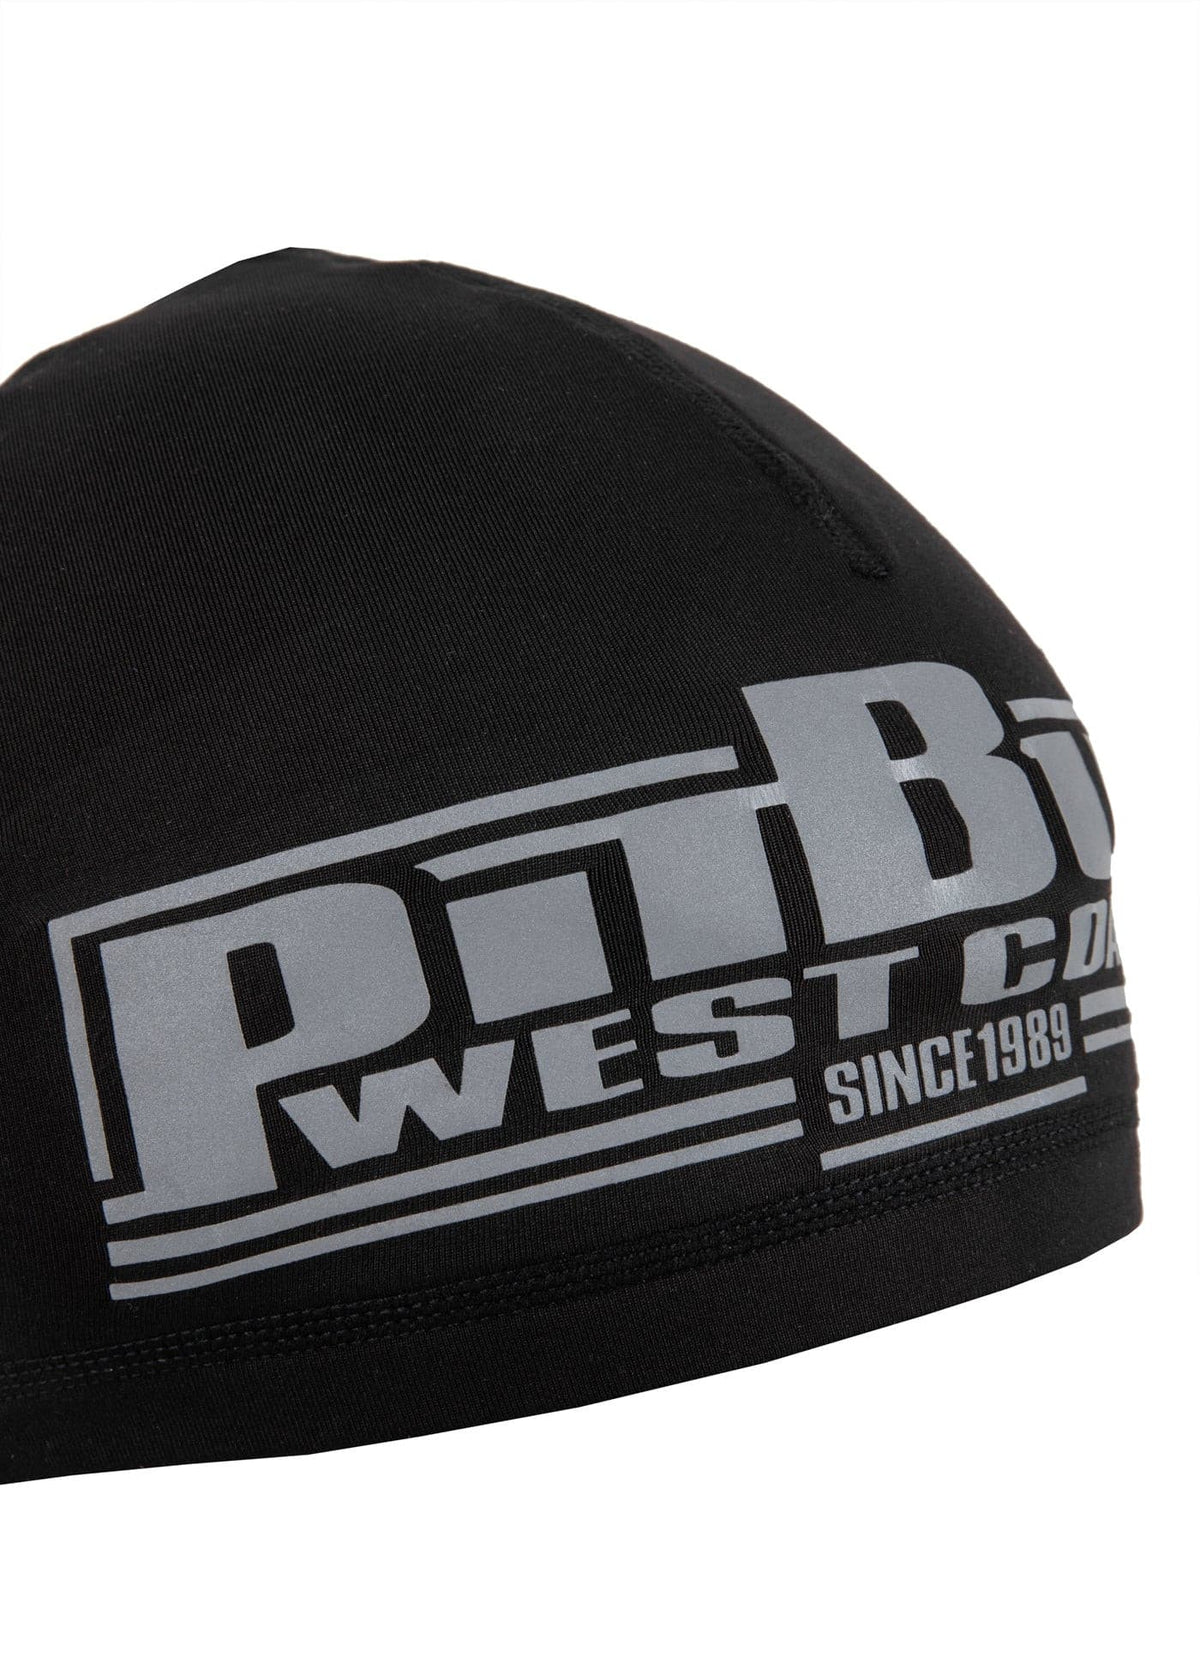 BOXING Special Sport Black Beanie.